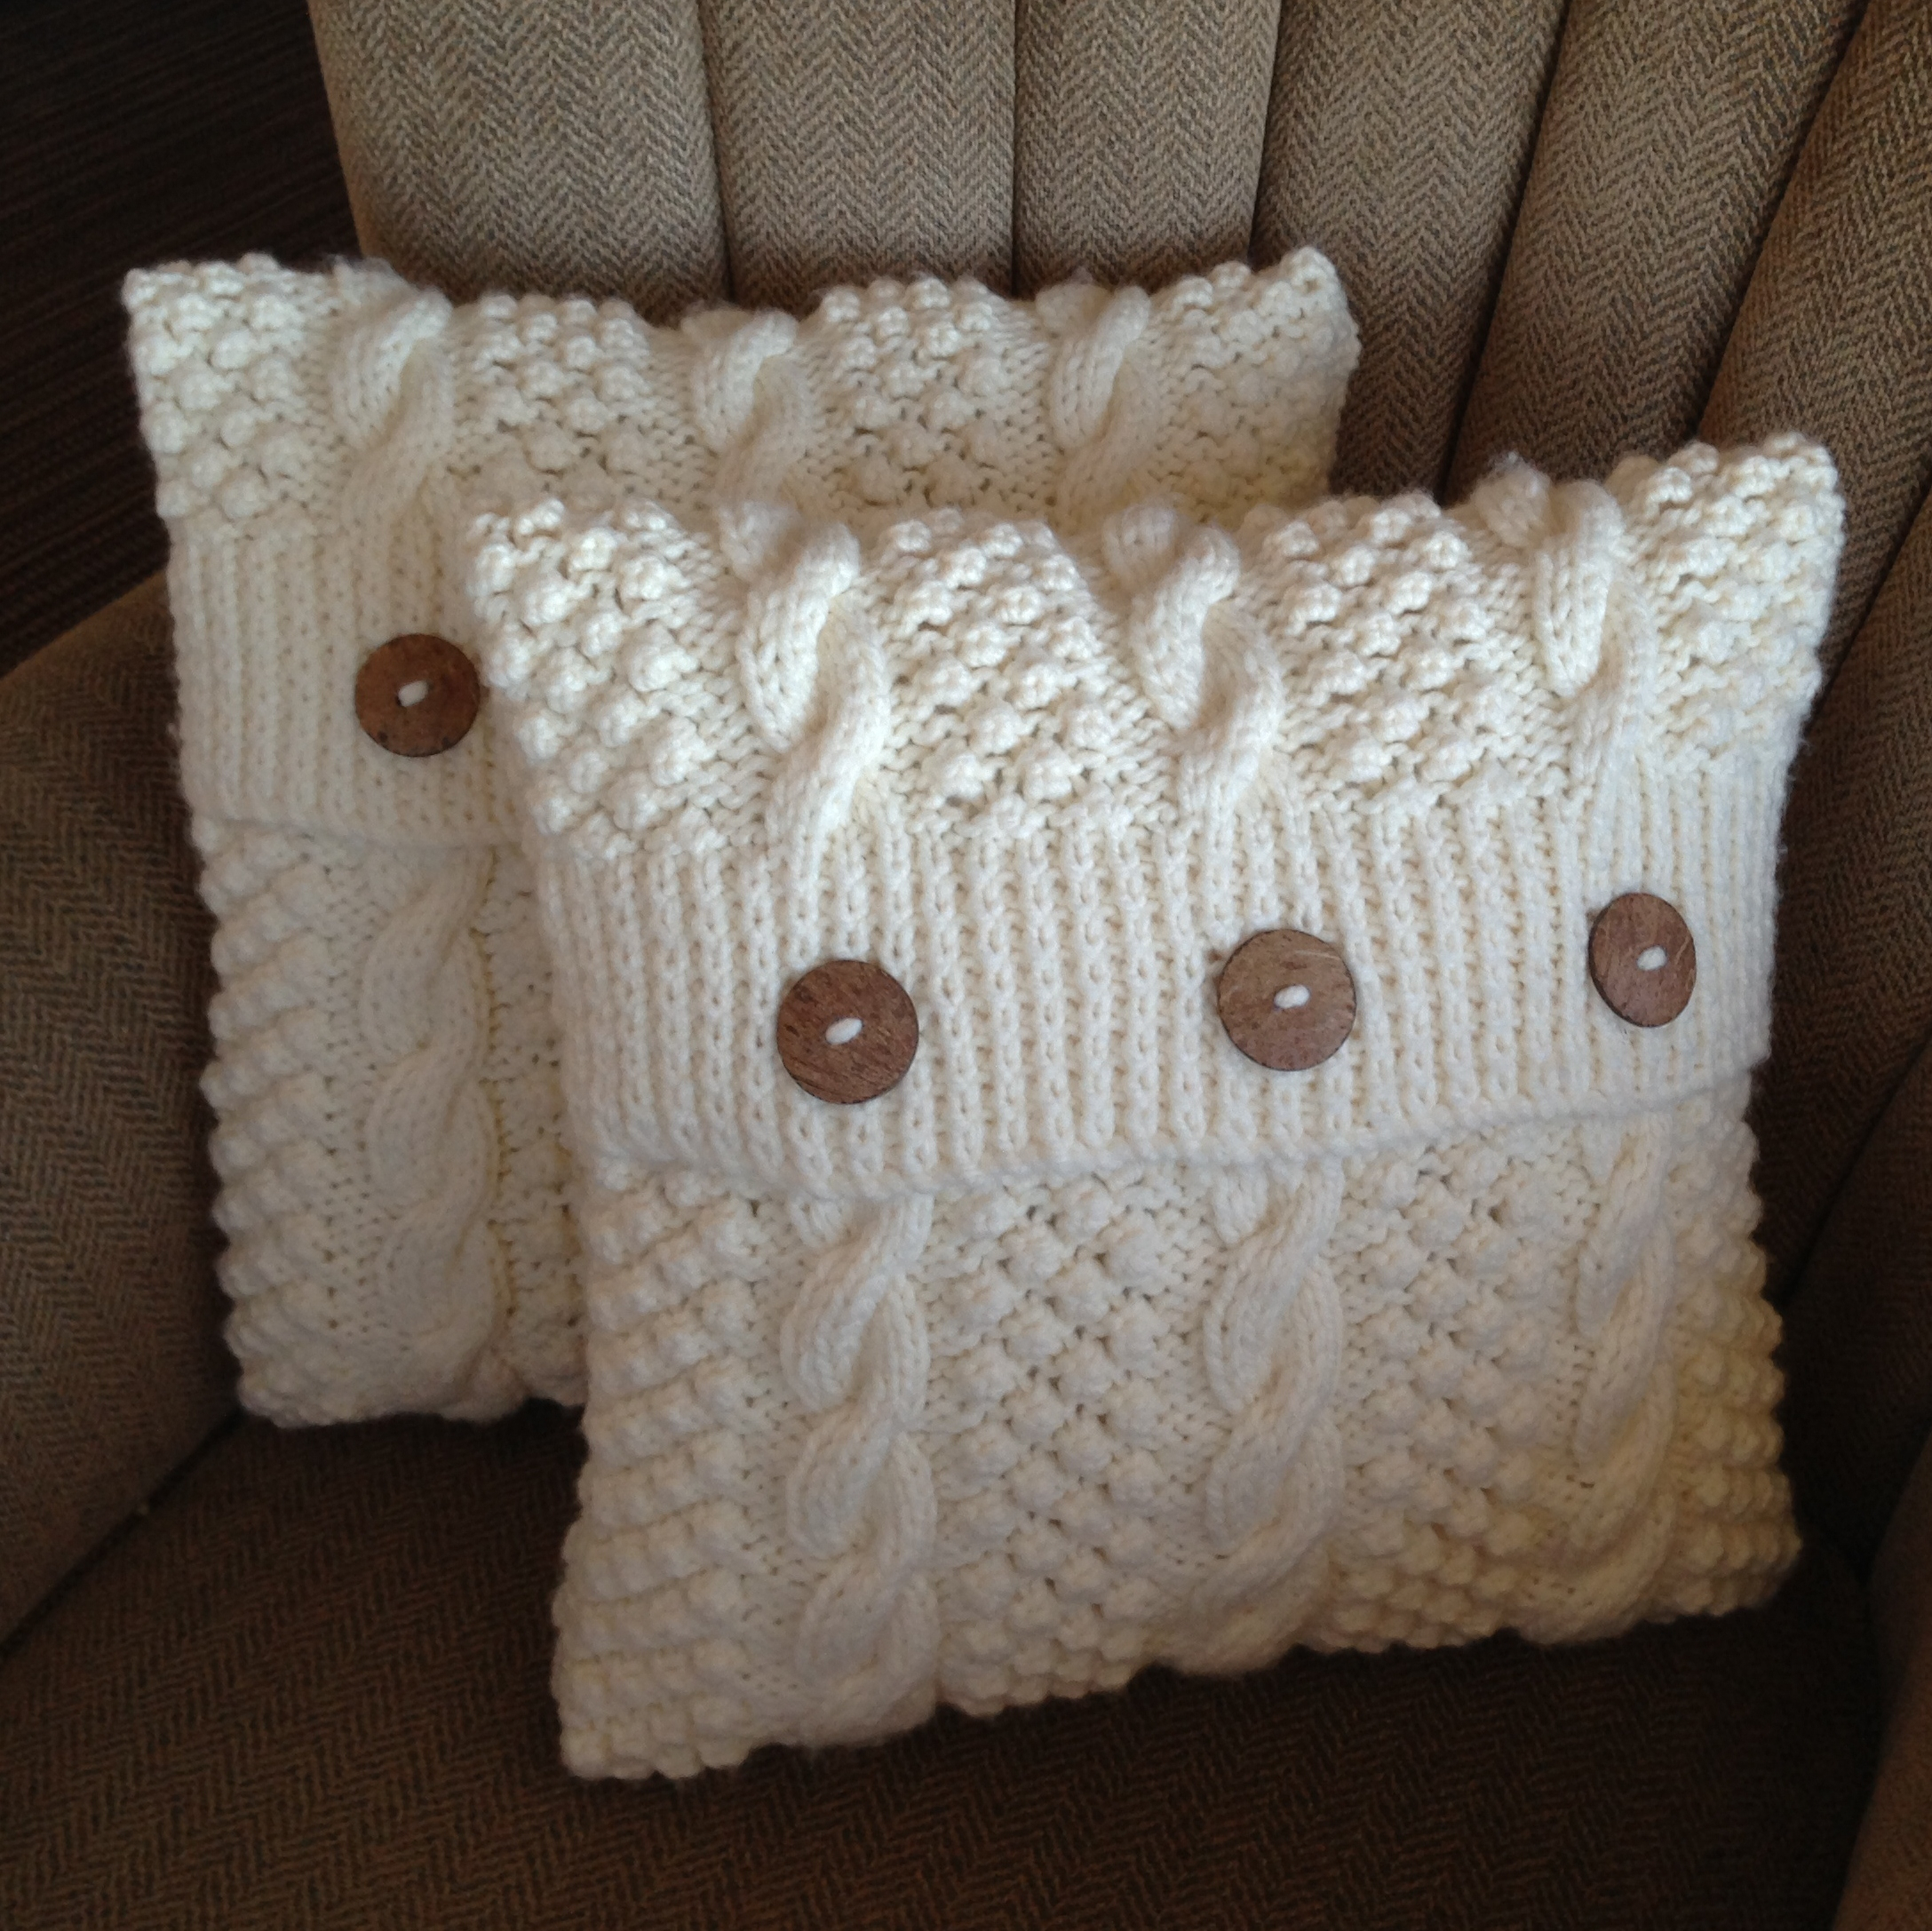 Knitting Pattern For Cushion Cover With Cables Blackberry Cables Cushion Cover In 5 Sizes Pdf Knitting Pattern